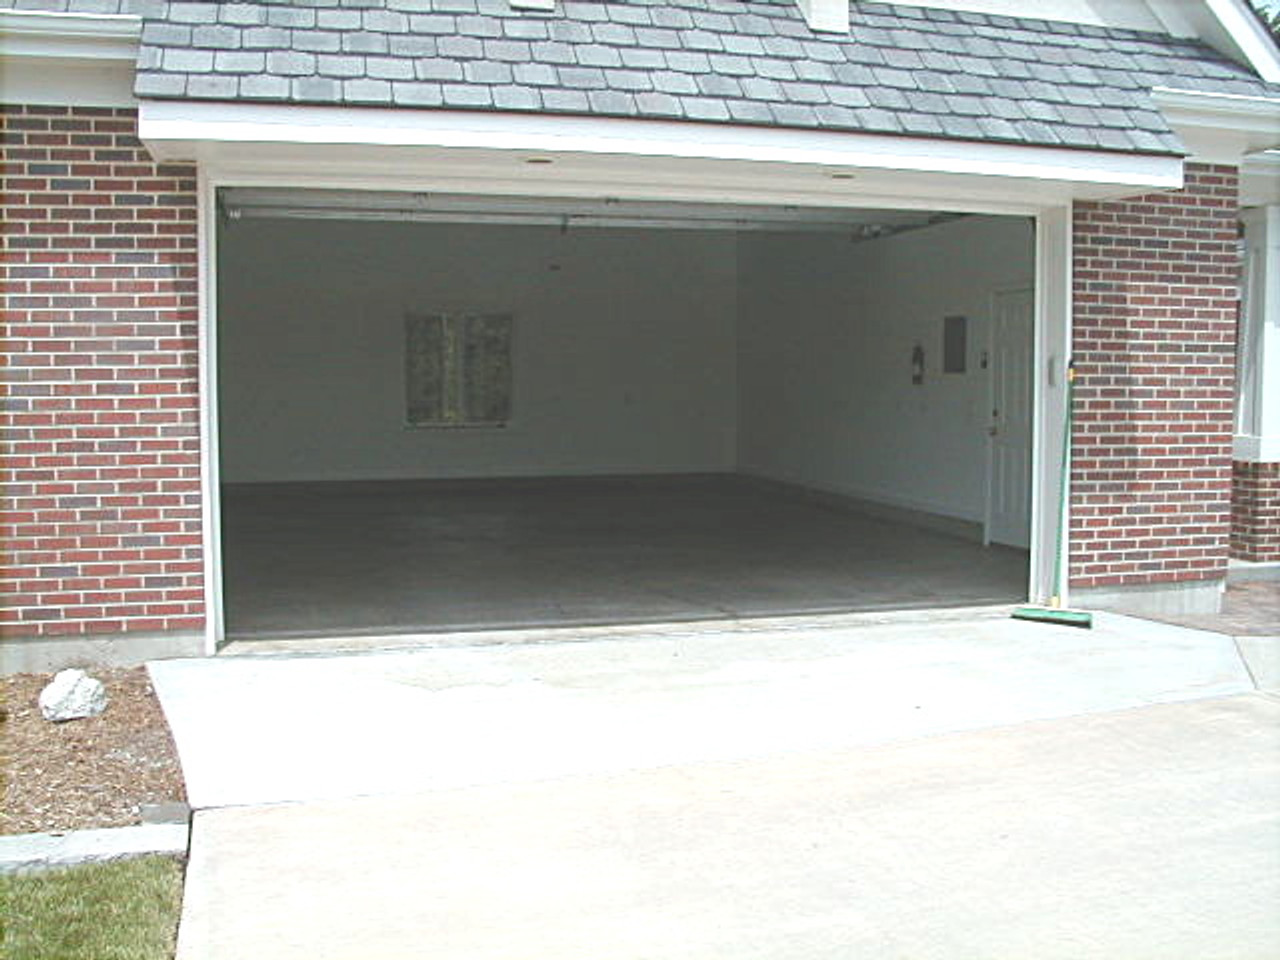 SealGreen Driveway and Garage Cleaner Concentrate is design to clean garage floors